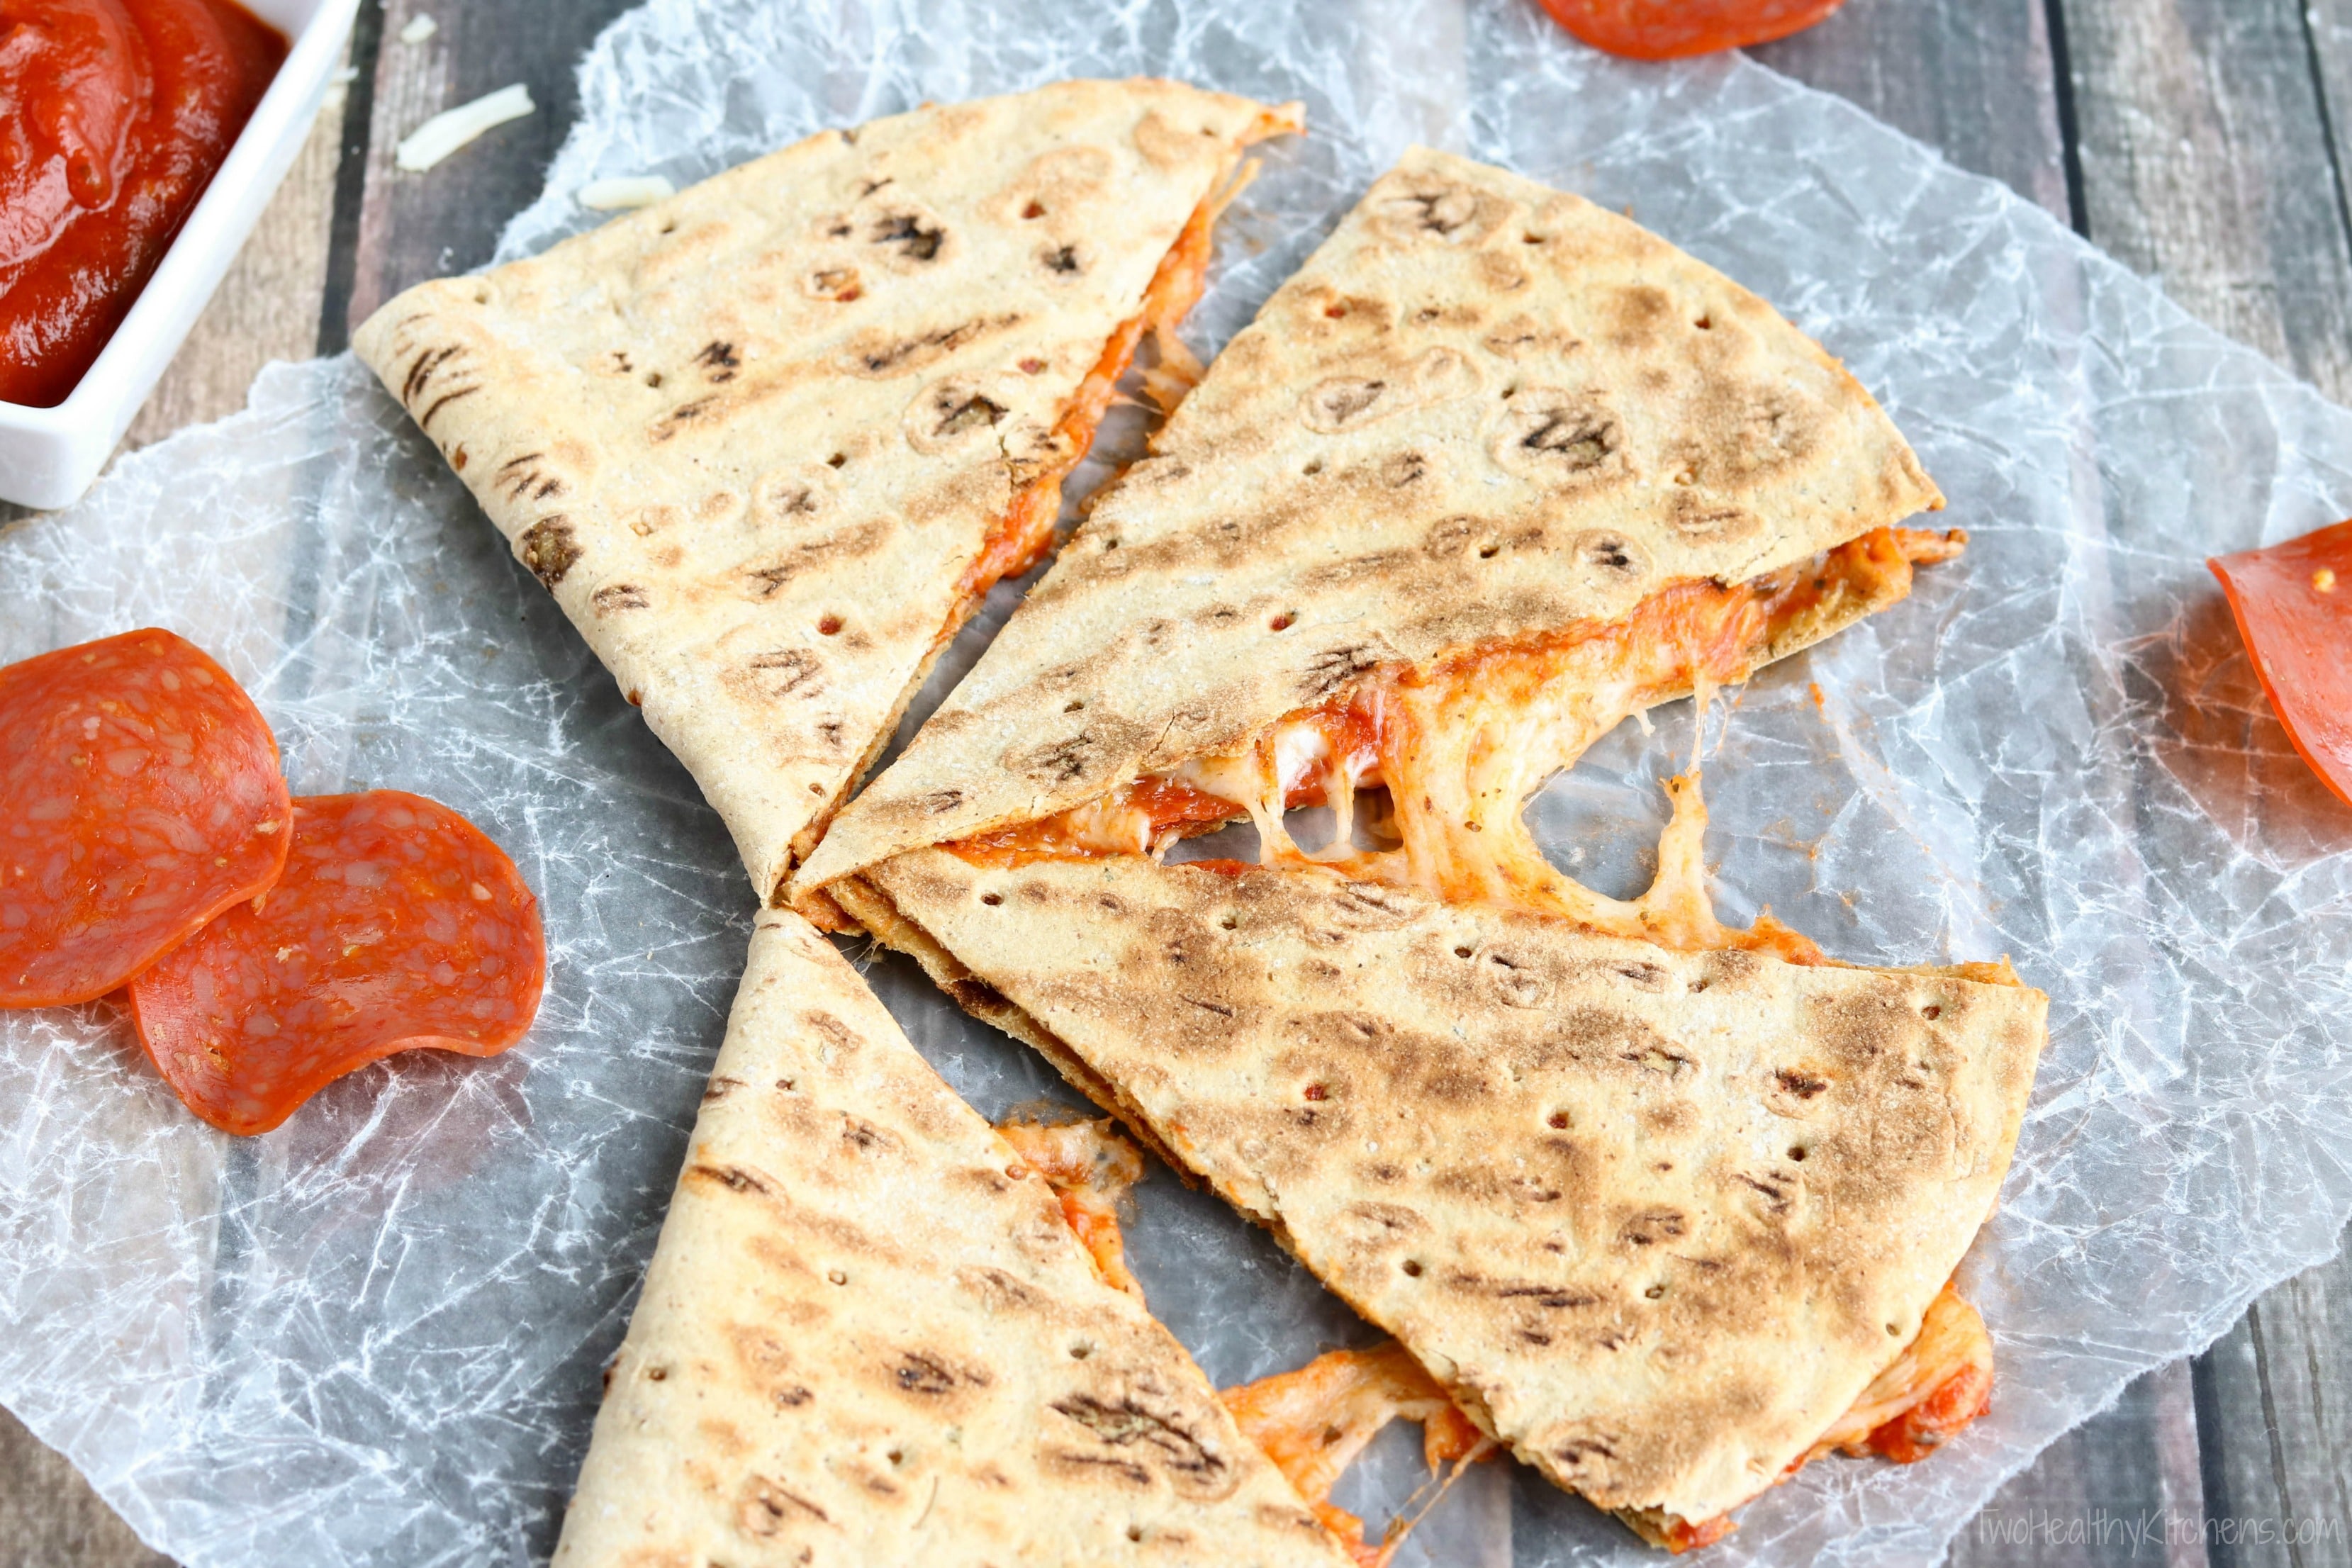 This easy Pepperoni Pizza Quesadilla recipe takes just minutes! With fiber-rich whole grains and lots of protein, it’s perfect as a quick meal or a hearty power snack! {ad} | www.TwoHealthyKitchens.com